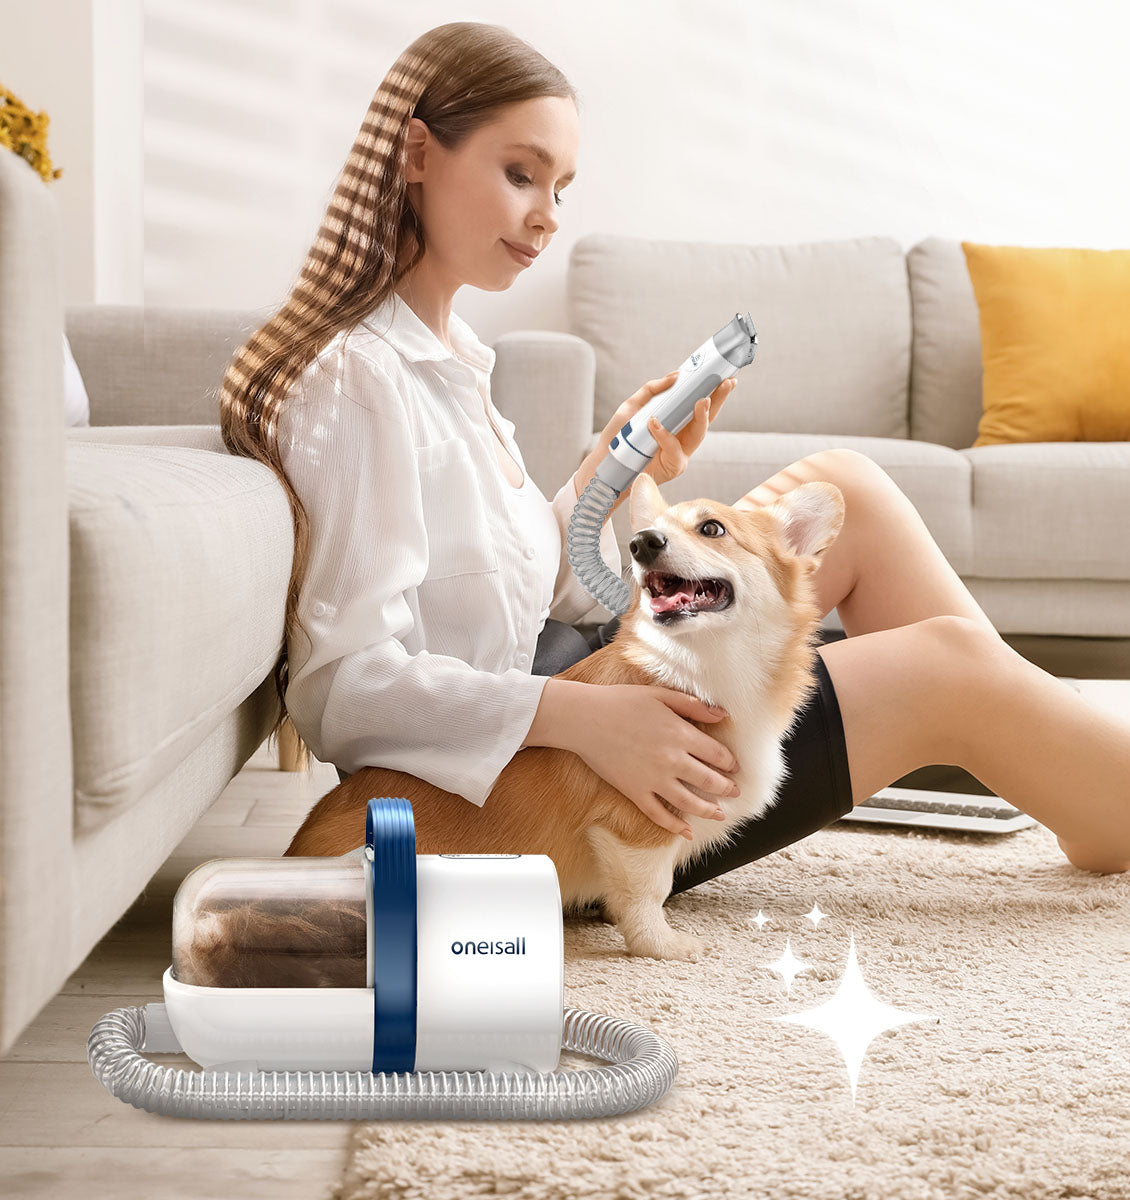 Keep Your Pets Looking Great with the Oneisall Professional Grooming Trimmer and Vacuum